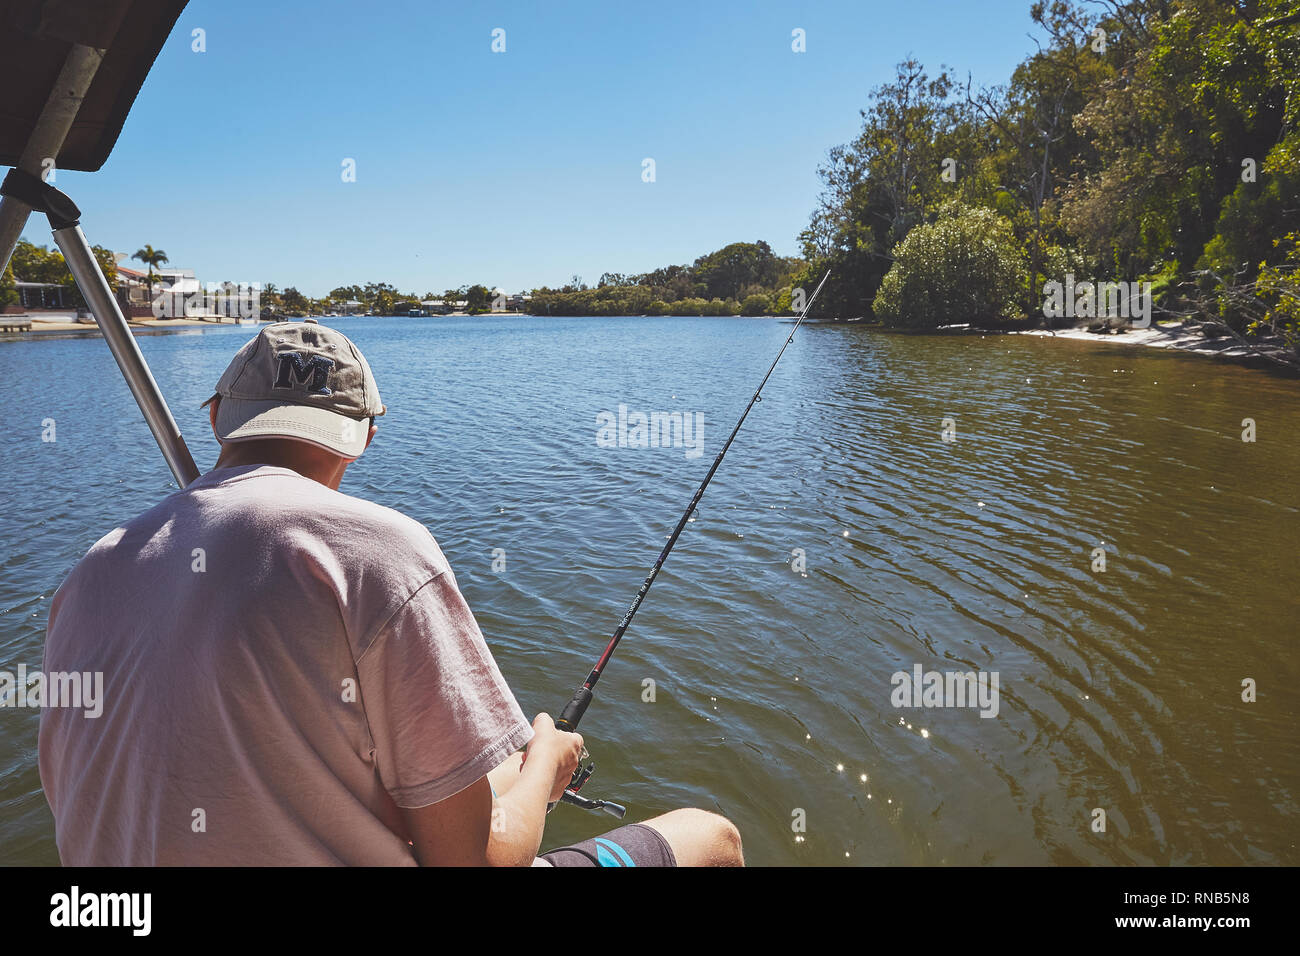 Teenage male on a small boat, fishing, on a river in Queensland, Australia Stock Photo